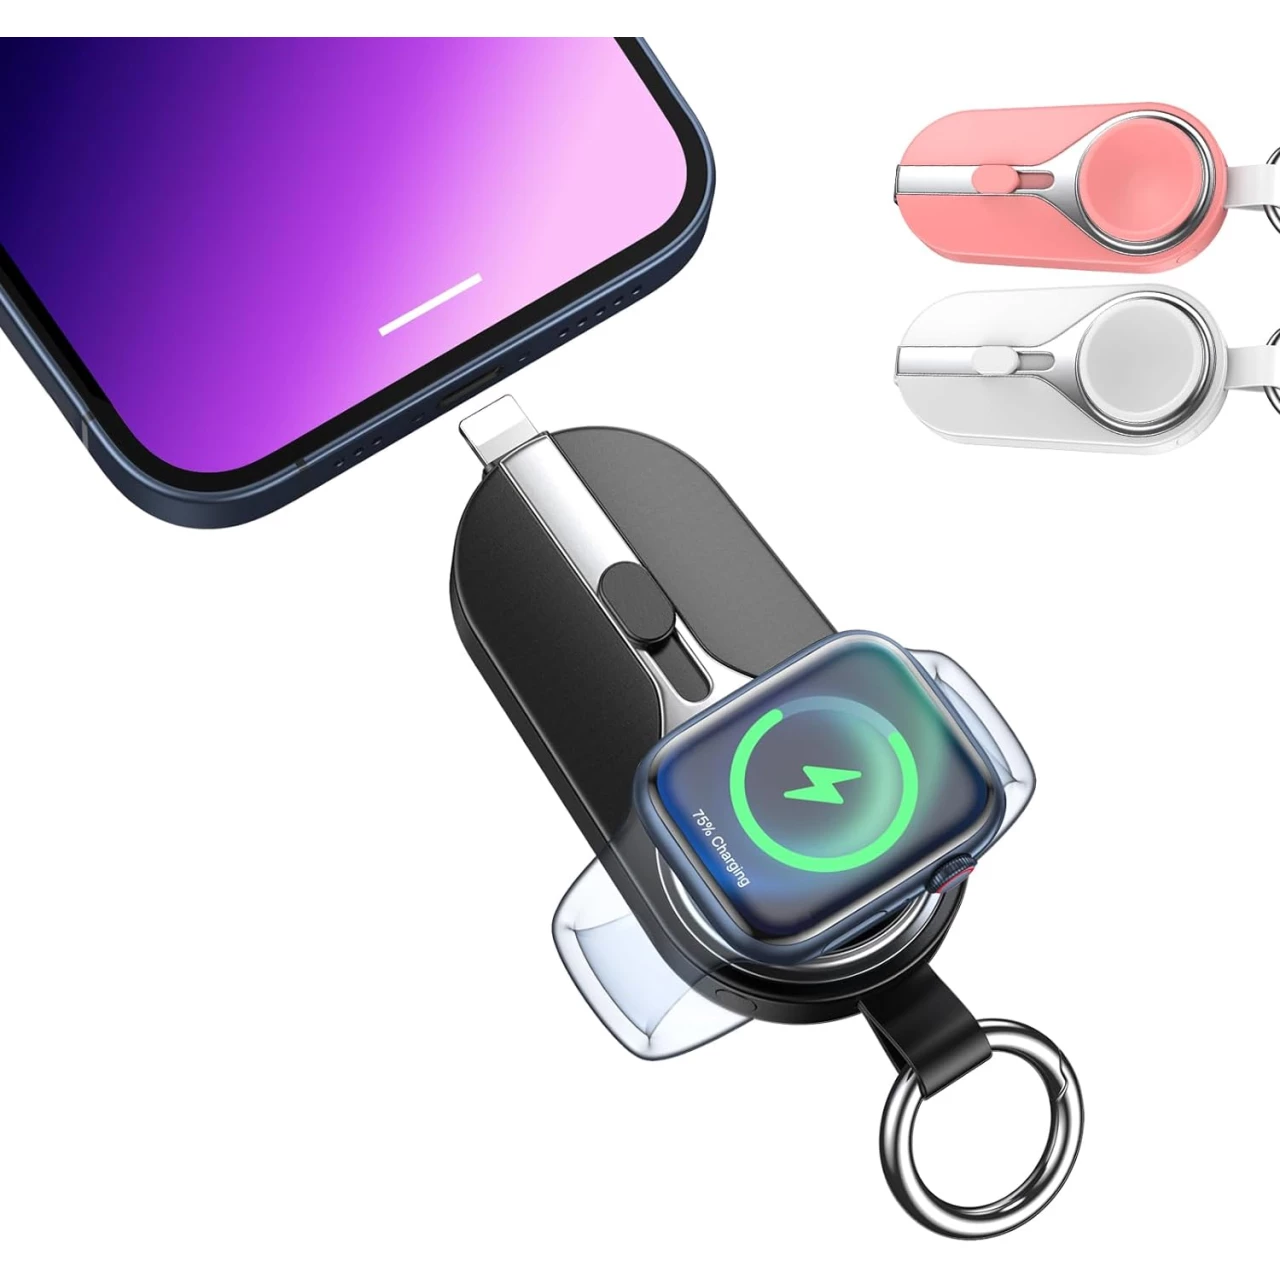 EMNT Keychain Portable Charger for iPhone and Apple Watch